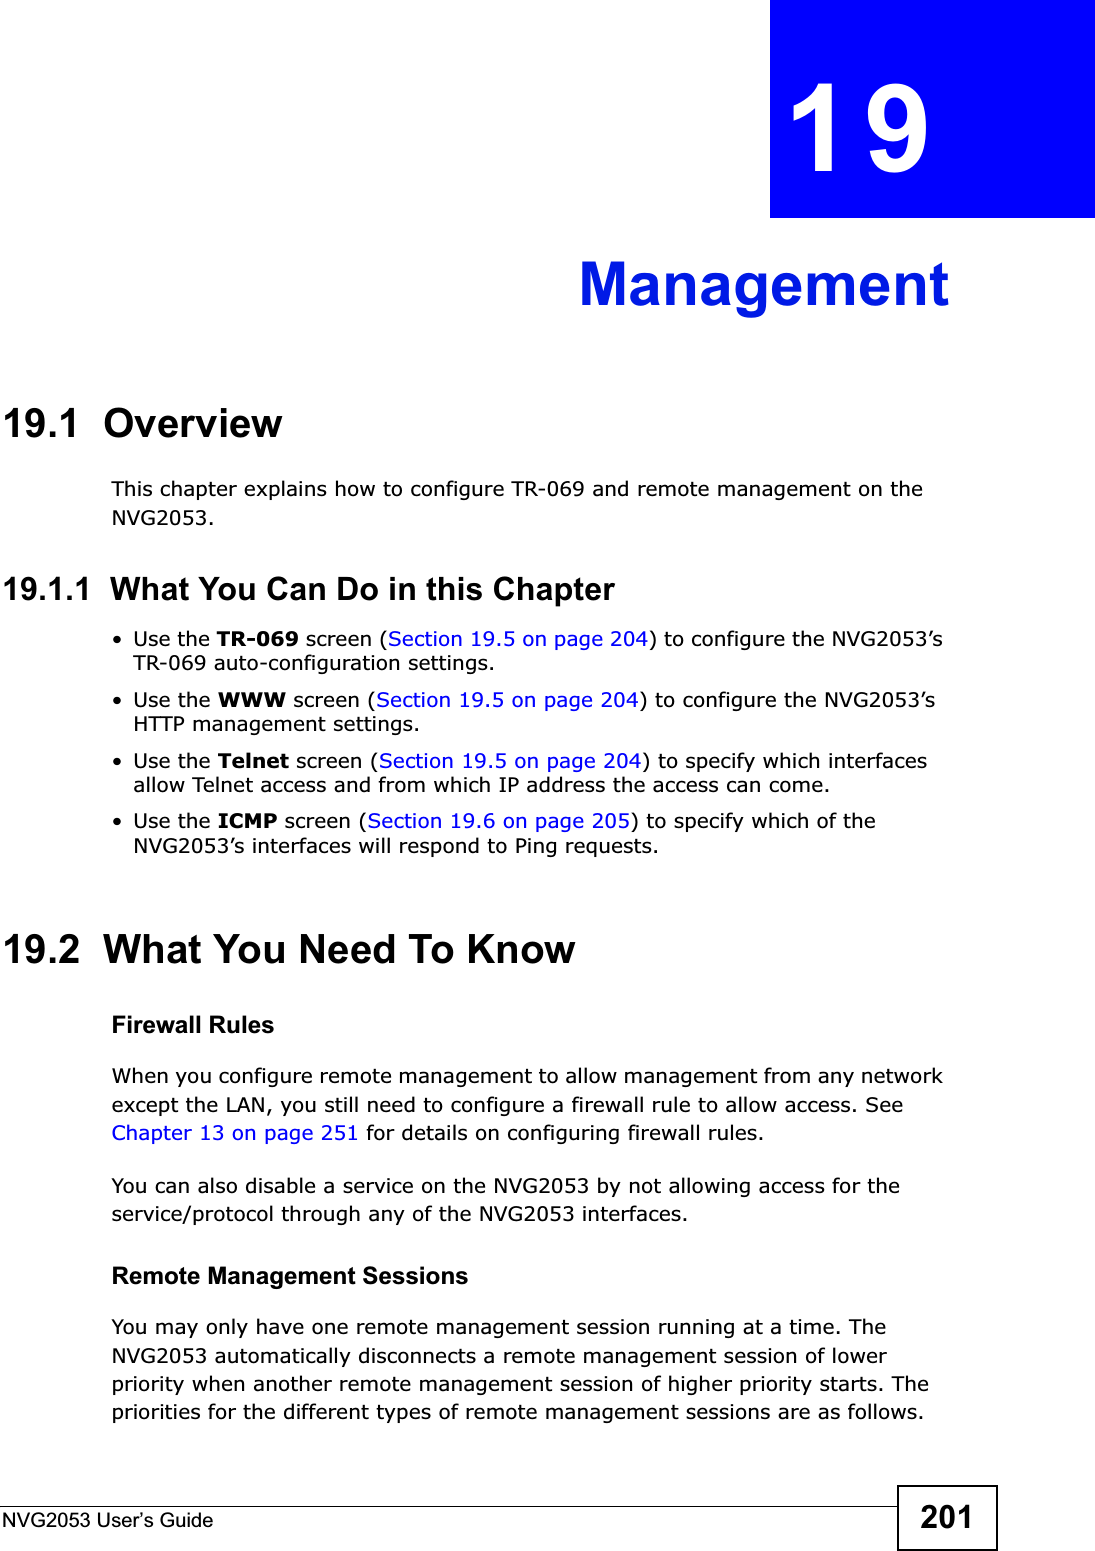 NVG2053 User’s Guide 201CHAPTER 19Management19.1  OverviewThis chapter explains how to configure TR-069 and remote management on the NVG2053.19.1.1  What You Can Do in this Chapter•Use the TR-069 screen (Section 19.5 on page 204) to configure the NVG2053’s TR-069 auto-configuration settings.•Use the WWW screen (Section 19.5 on page 204) to configure the NVG2053’s HTTP management settings. •Use the Telnet screen (Section 19.5 on page 204) to specify which interfaces allow Telnet access and from which IP address the access can come.•Use the ICMP screen (Section 19.6 on page 205) to specify which of the NVG2053’s interfaces will respond to Ping requests.19.2  What You Need To KnowFirewall RulesWhen you configure remote management to allow management from any network except the LAN, you still need to configure a firewall rule to allow access. See Chapter 13 on page 251 for details on configuring firewall rules.You can also disable a service on the NVG2053 by not allowing access for the service/protocol through any of the NVG2053 interfaces.Remote Management SessionsYou may only have one remote management session running at a time. The NVG2053 automatically disconnects a remote management session of lower priority when another remote management session of higher priority starts. The priorities for the different types of remote management sessions are as follows.